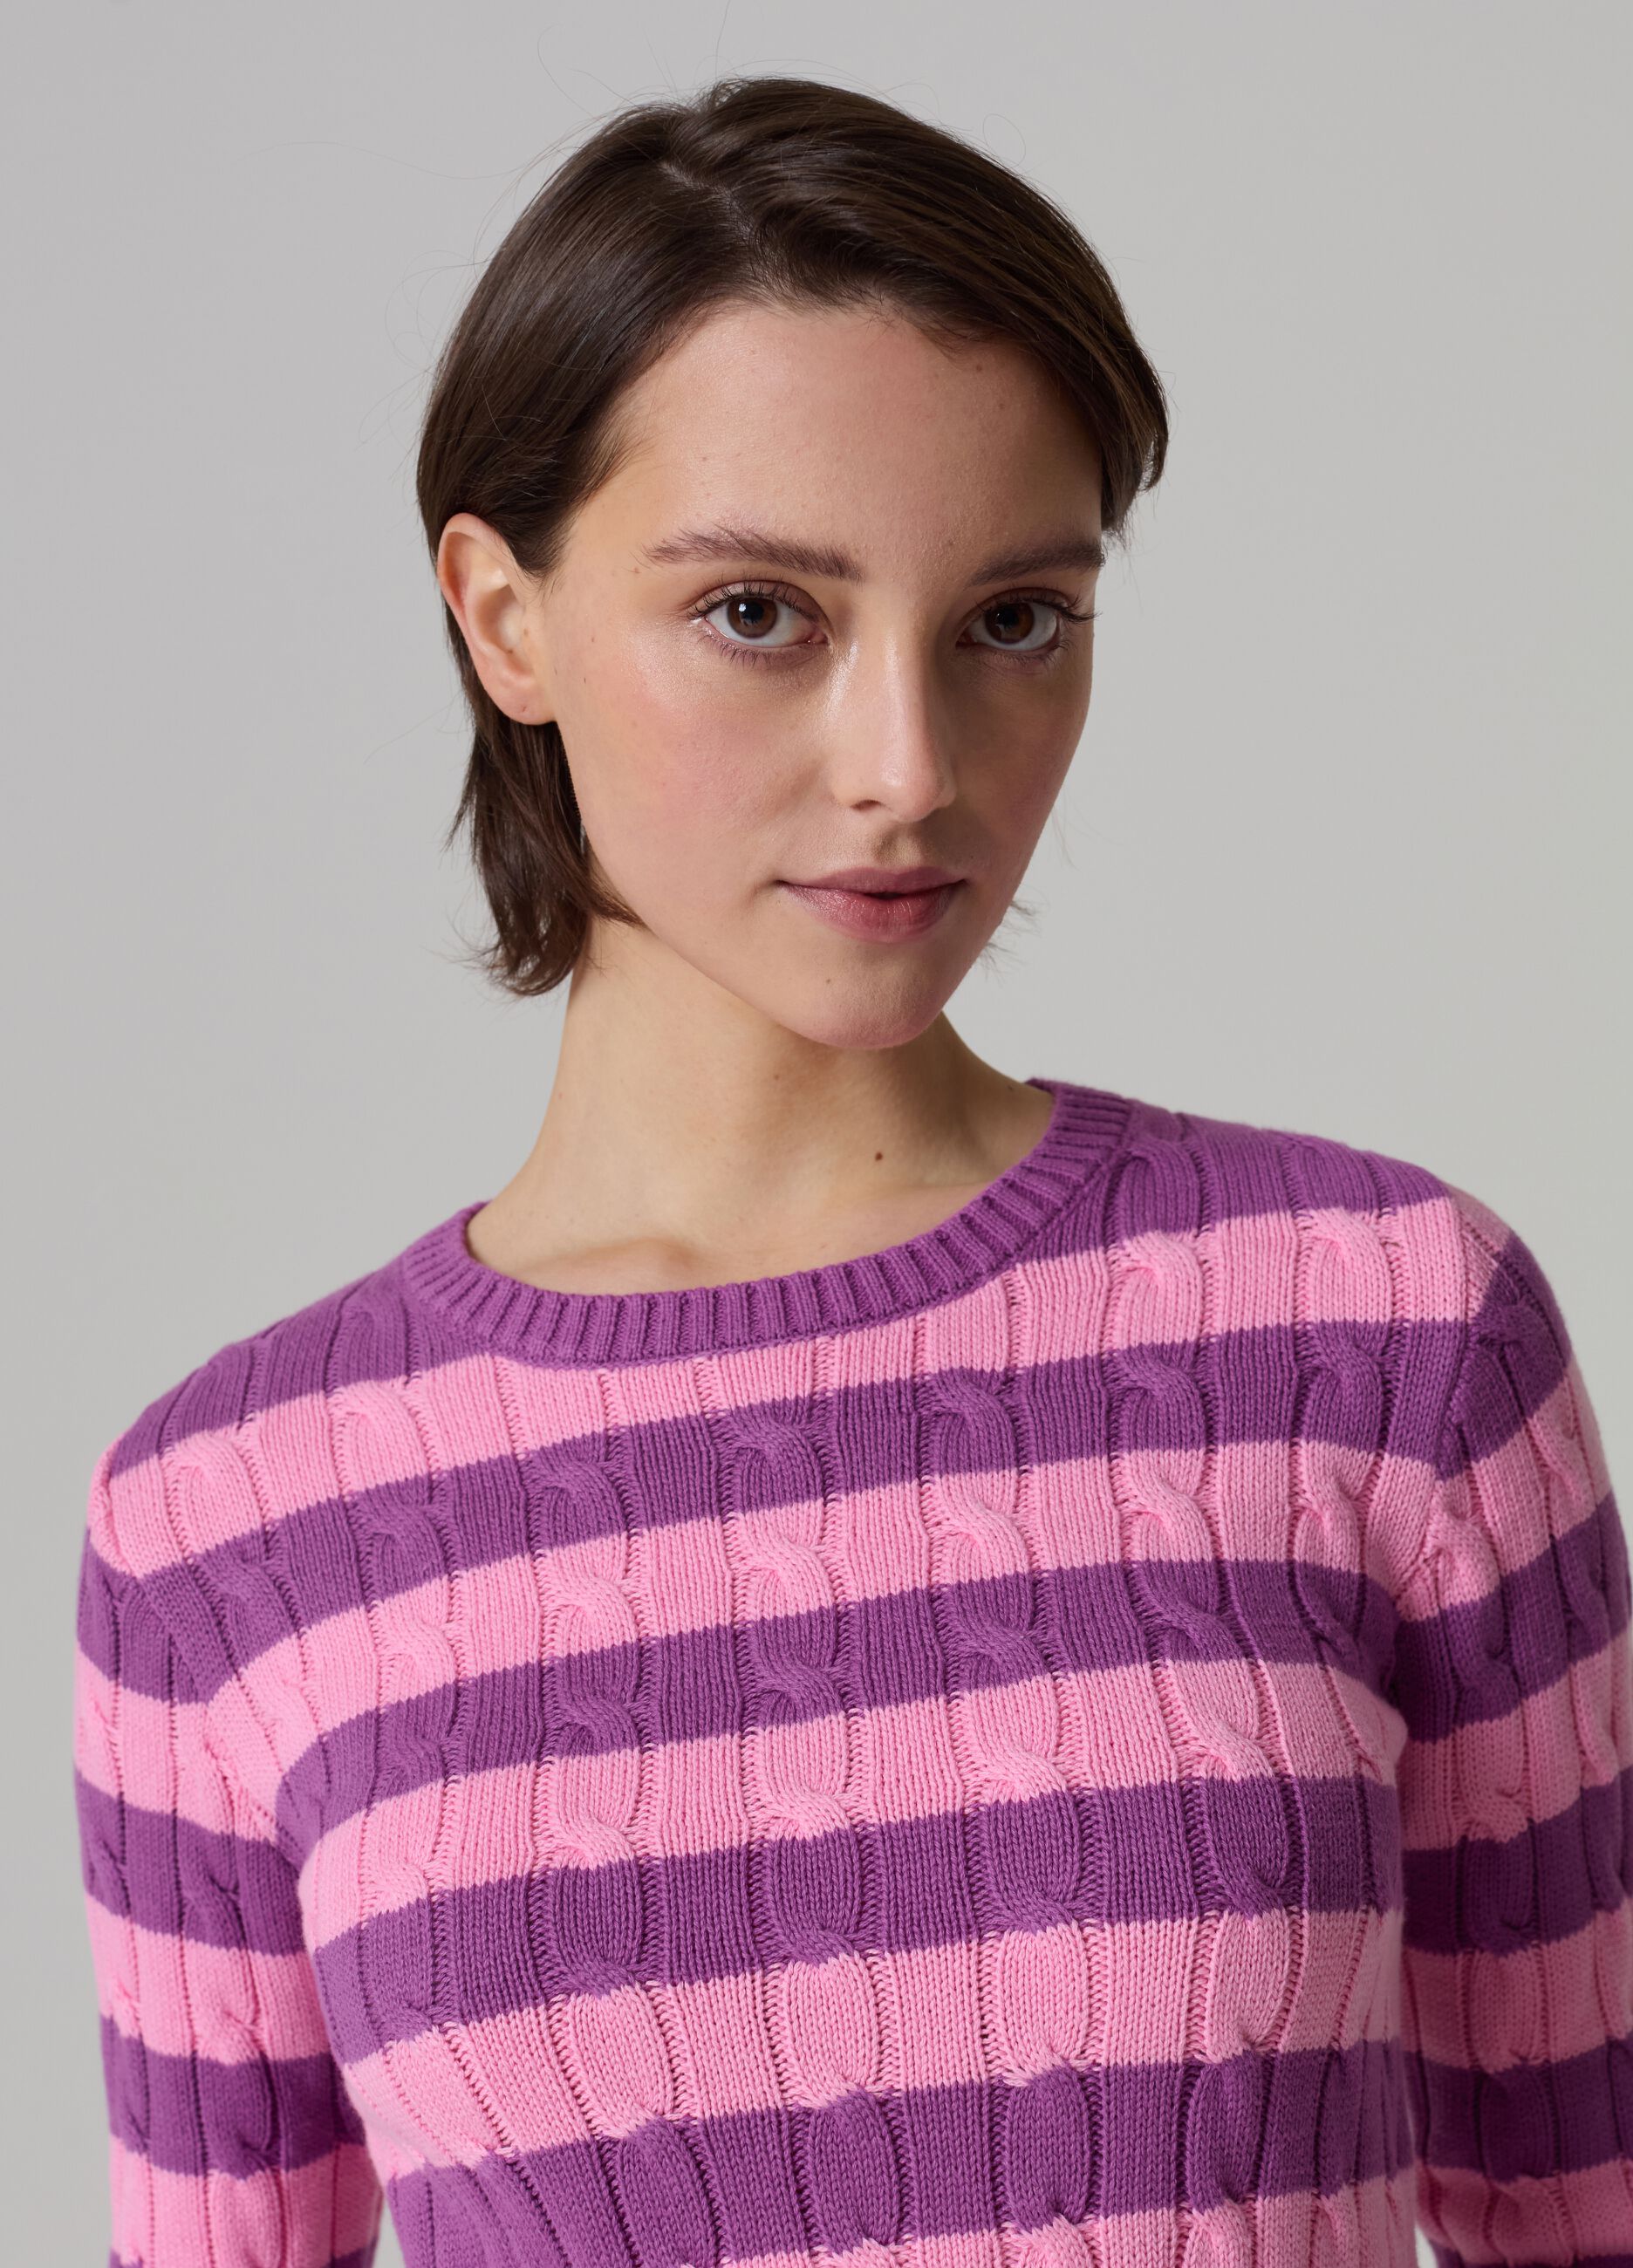 Striped pullover with braided design_0